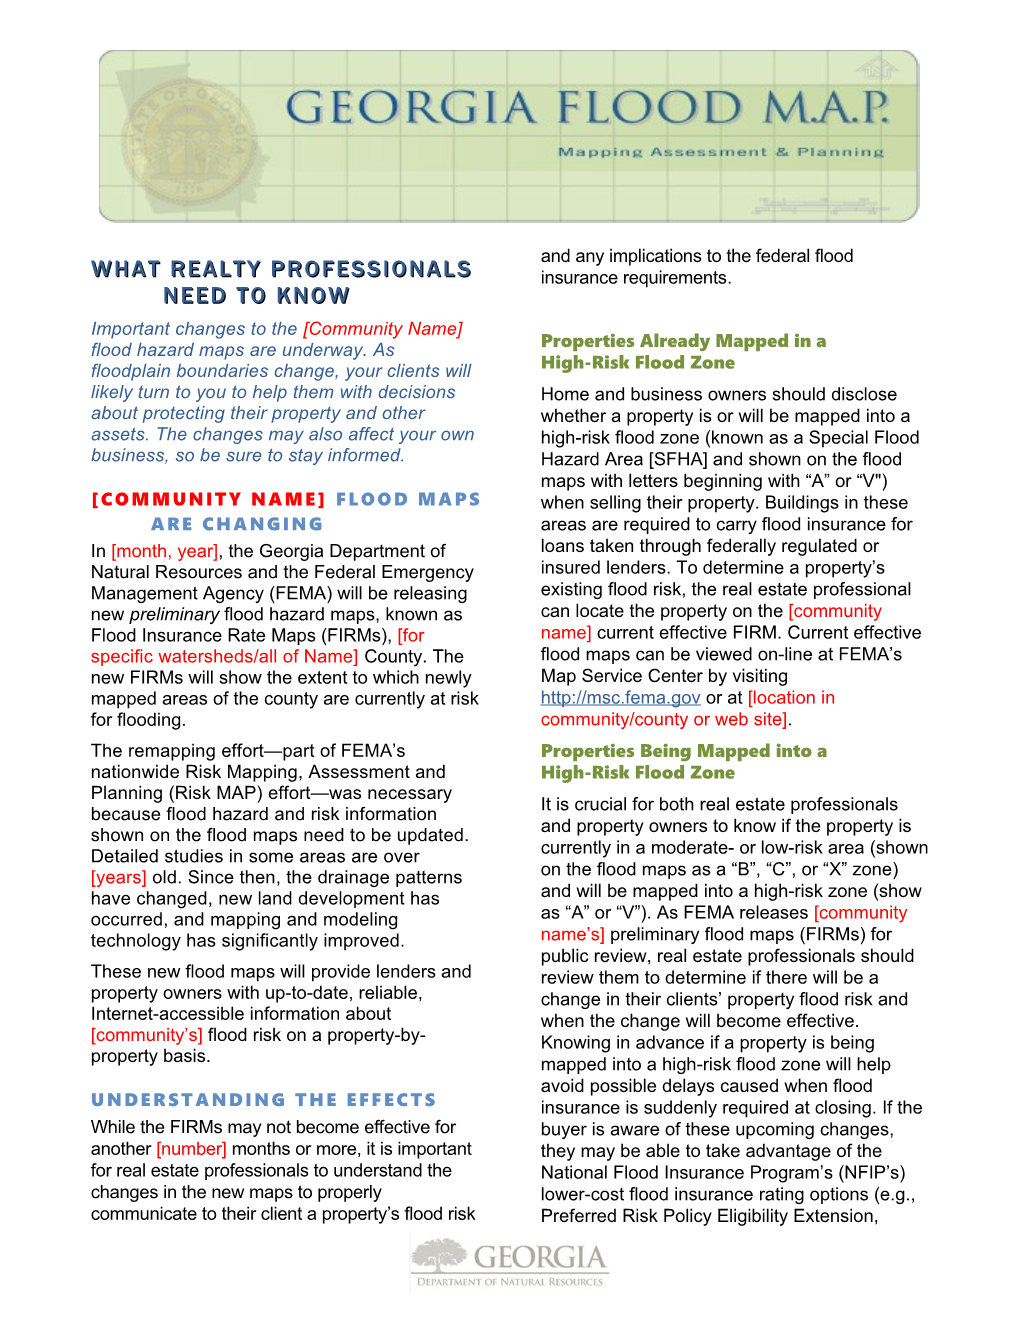 Realty Professionals Fact Sheet